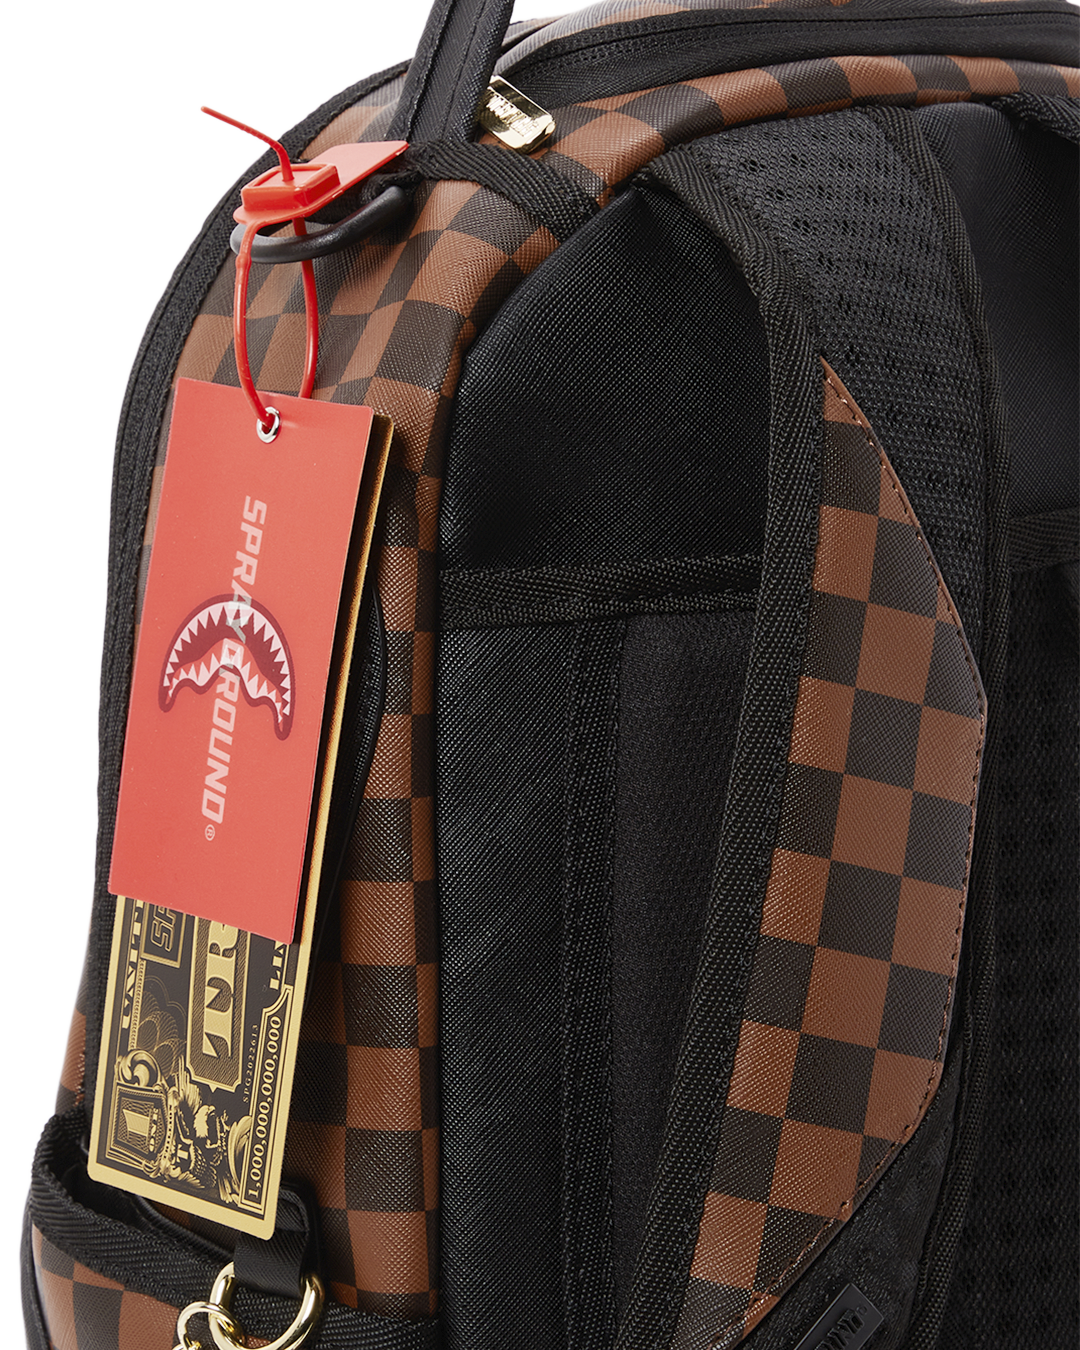 Metro Fusion - Sprayground Sharks In Paris Henny Never Too Many Backpack  (DLXV) - Backpacks